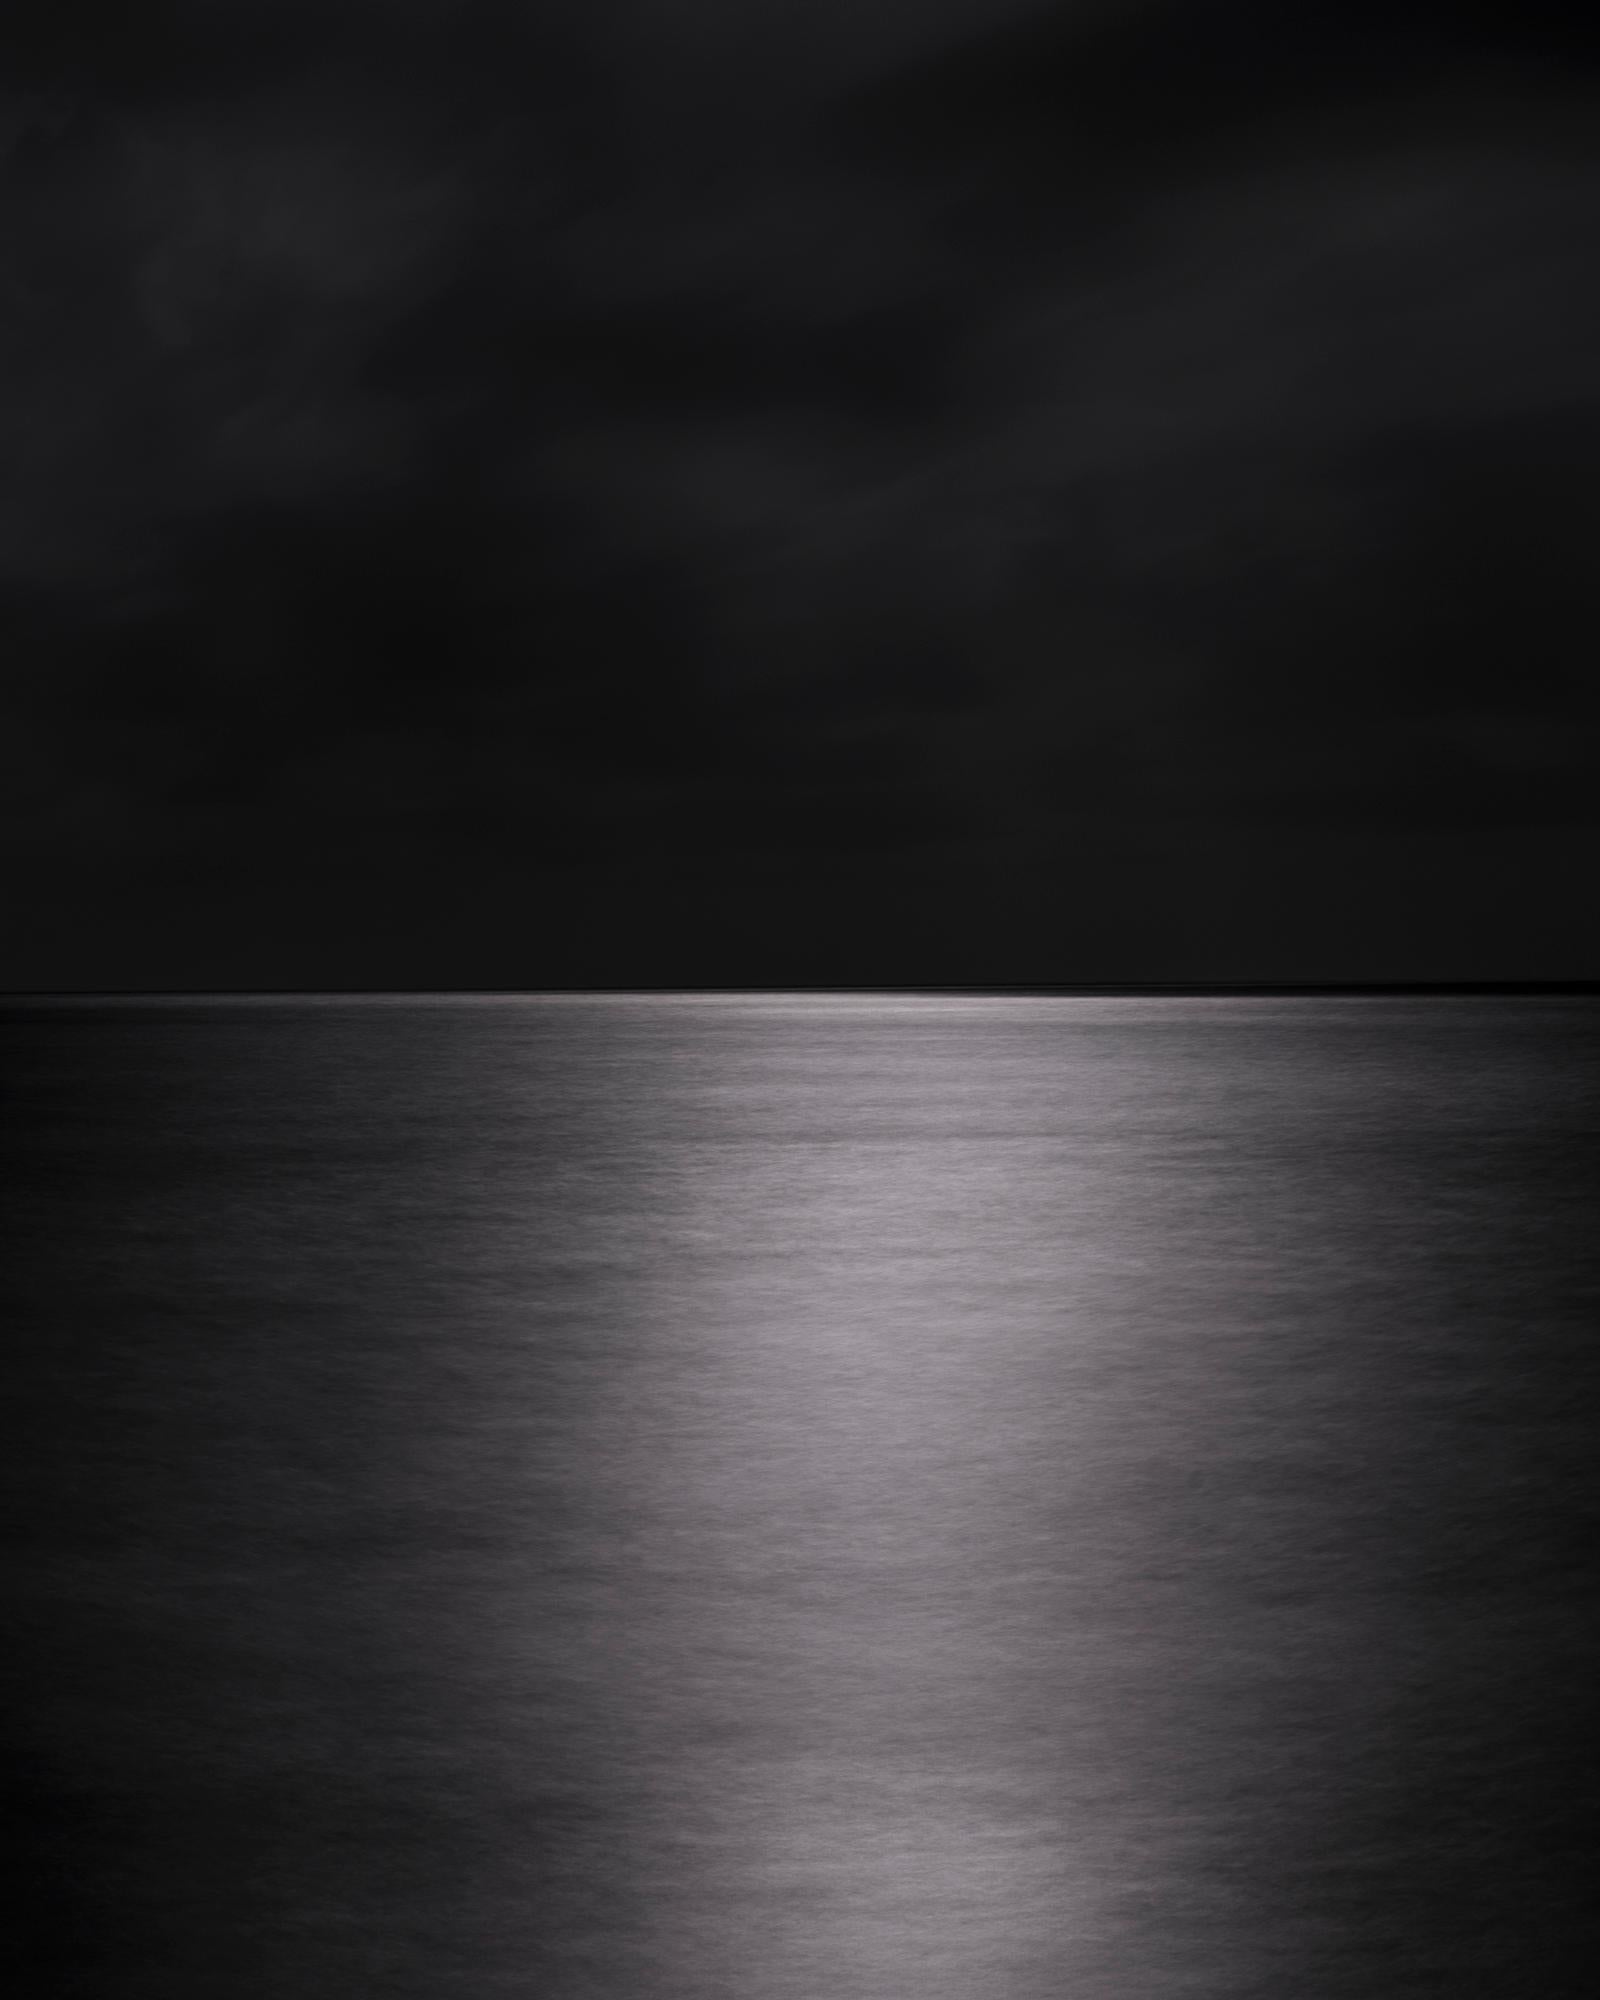 Miguel Winograd  Landscape Photograph - Moonrise I Cauquenes, From the Series Mares